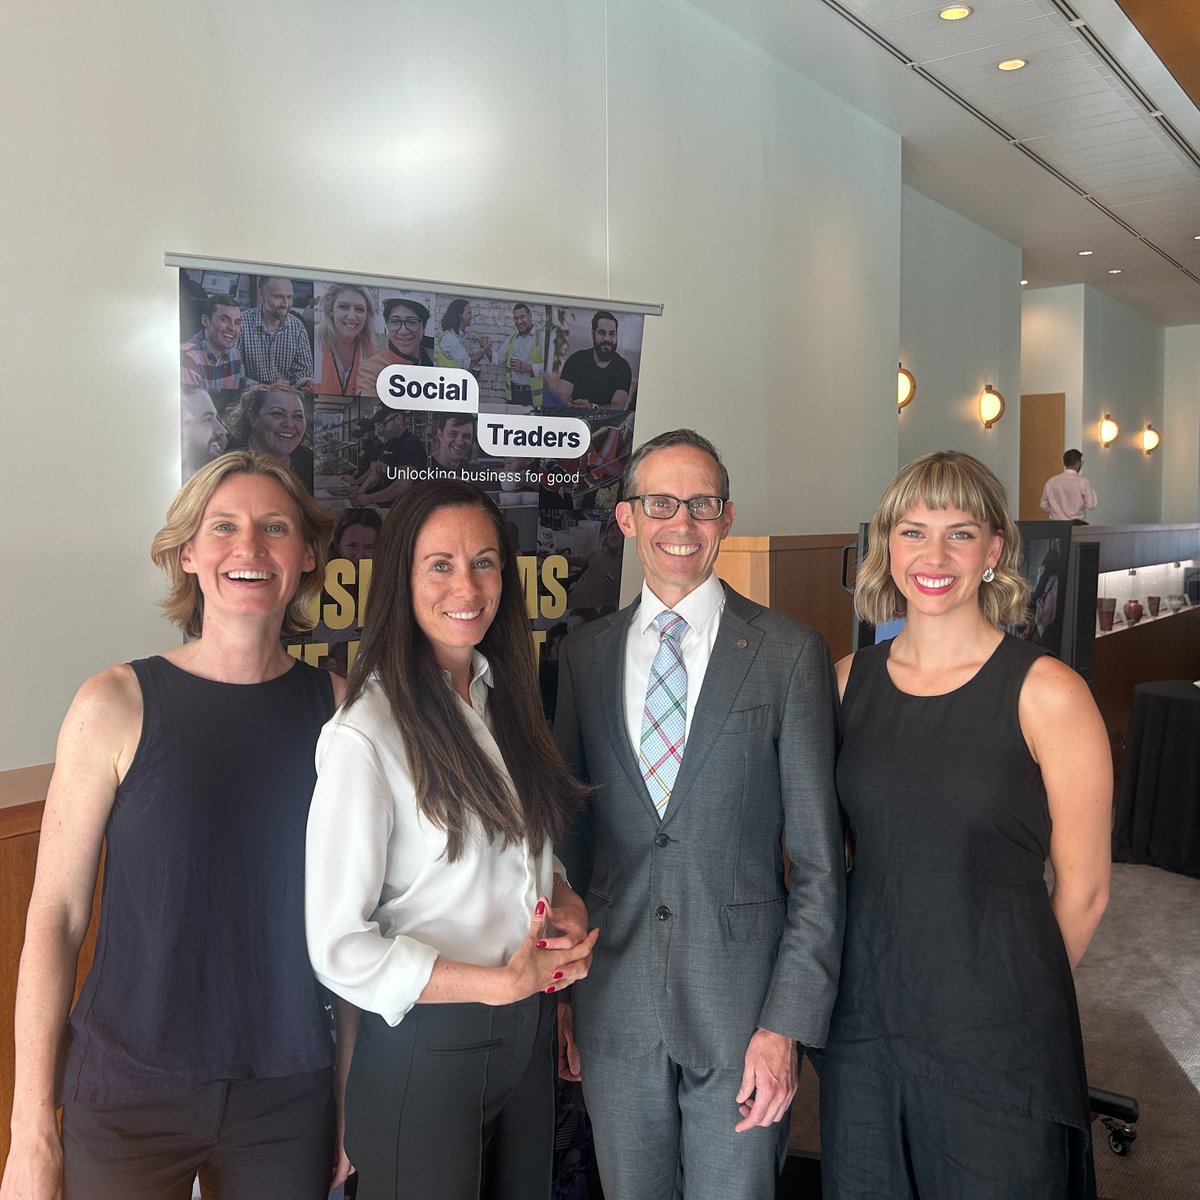 Jess Moore, Tara Anderson & Eloise Hall are among the leaders in Australian social trading & social enterprise, building a stronger community and a fairer society. My speech to their roundtable: ministers.treasury.gov.au/ministers/andr… #auspol